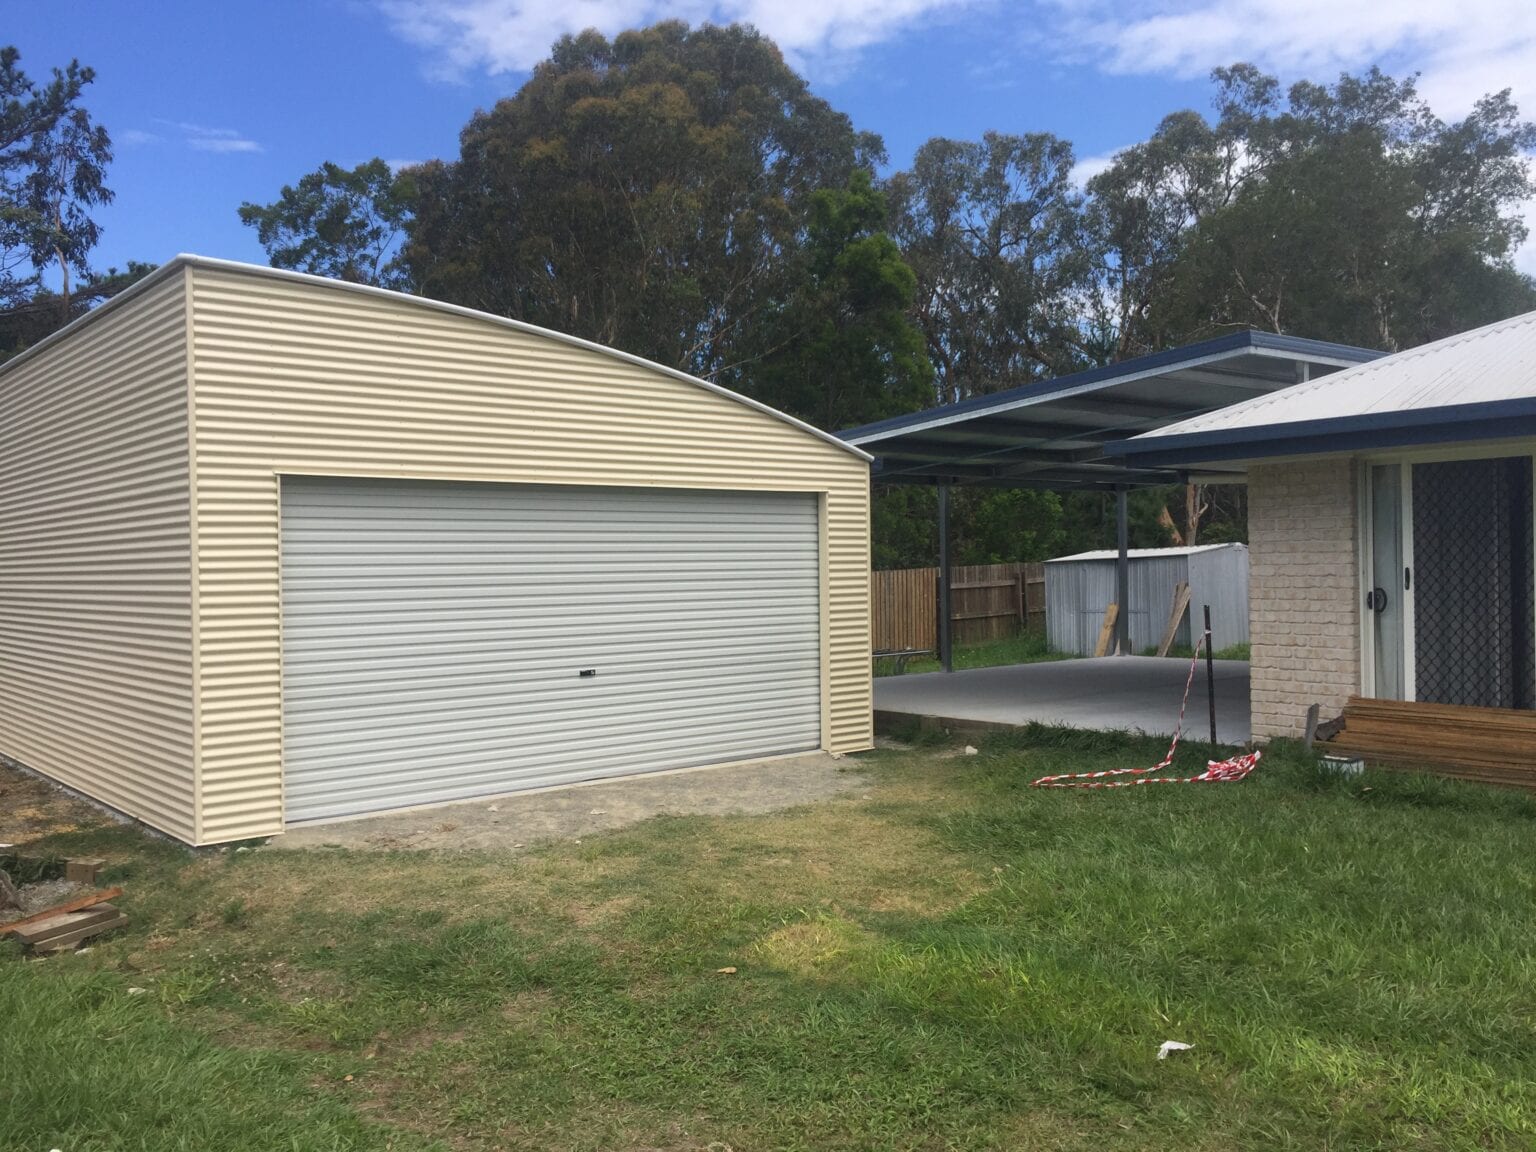 Curved Roof Cream garage and owning